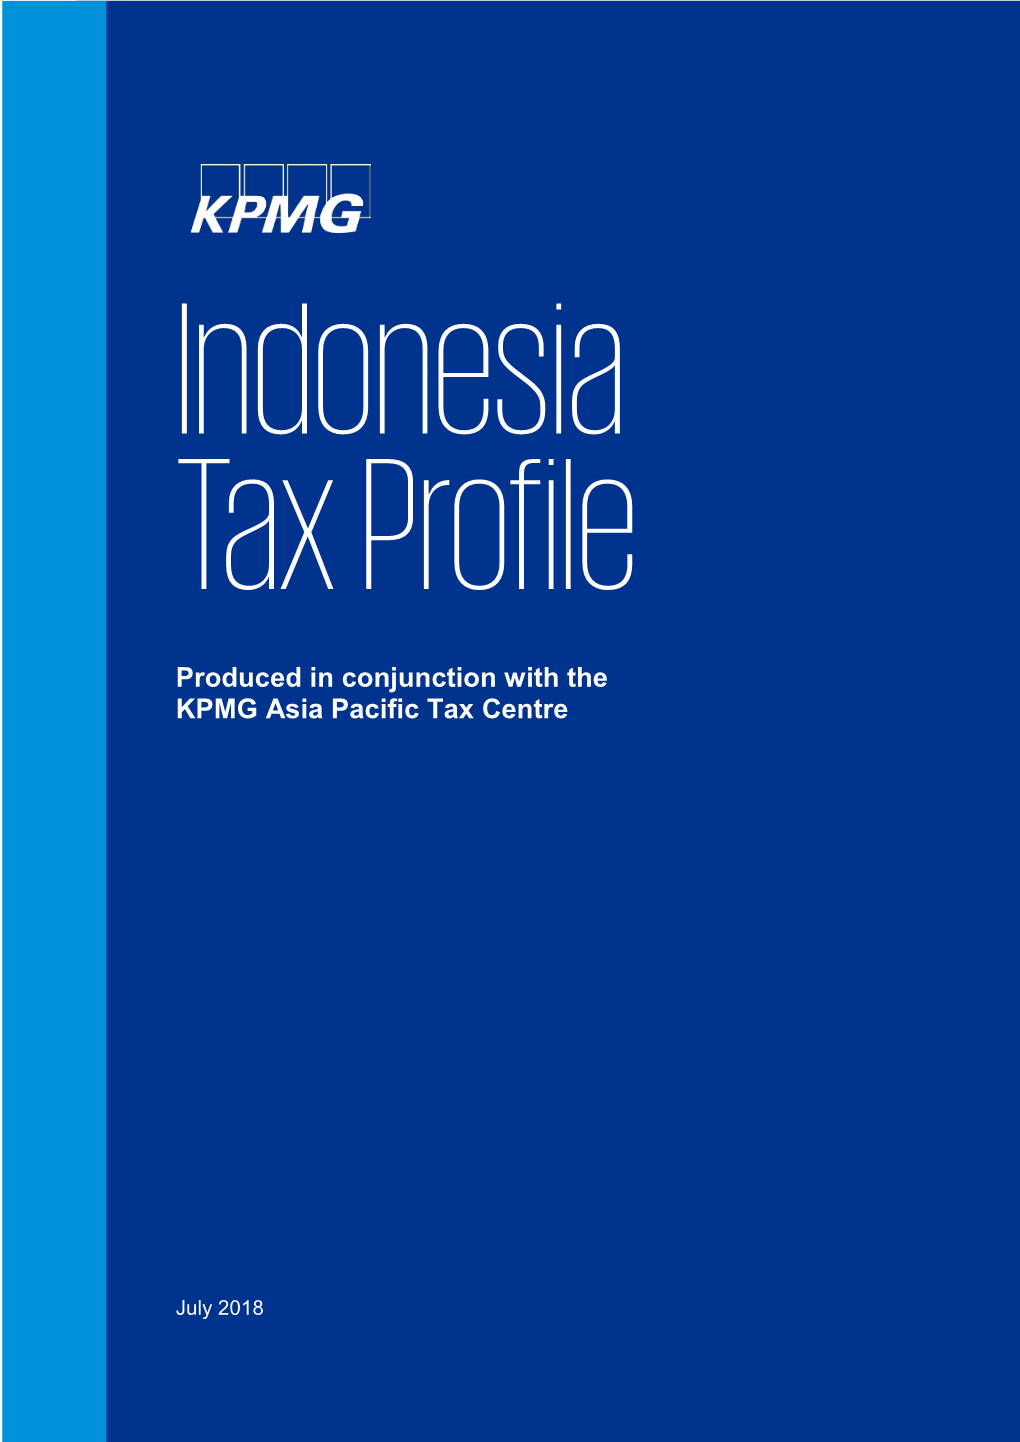 Country Tax Profile: Indonesia